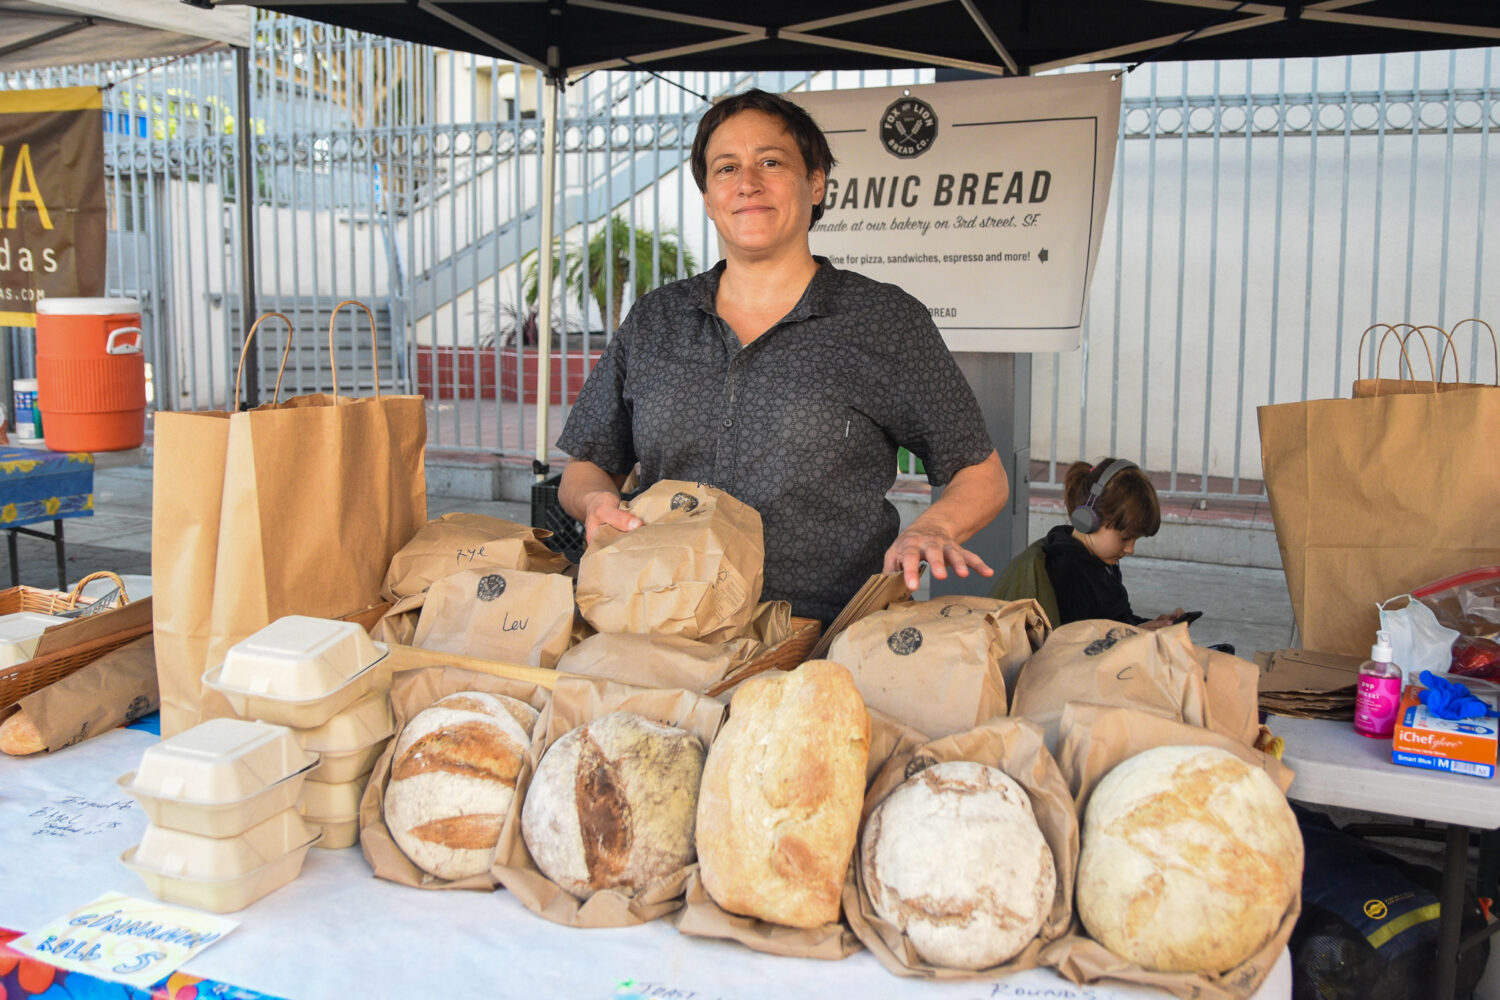 Baker Xan poses with bread at Fox and Lion Bread Co.'s stand at the Mission Community Market in San Francisco.